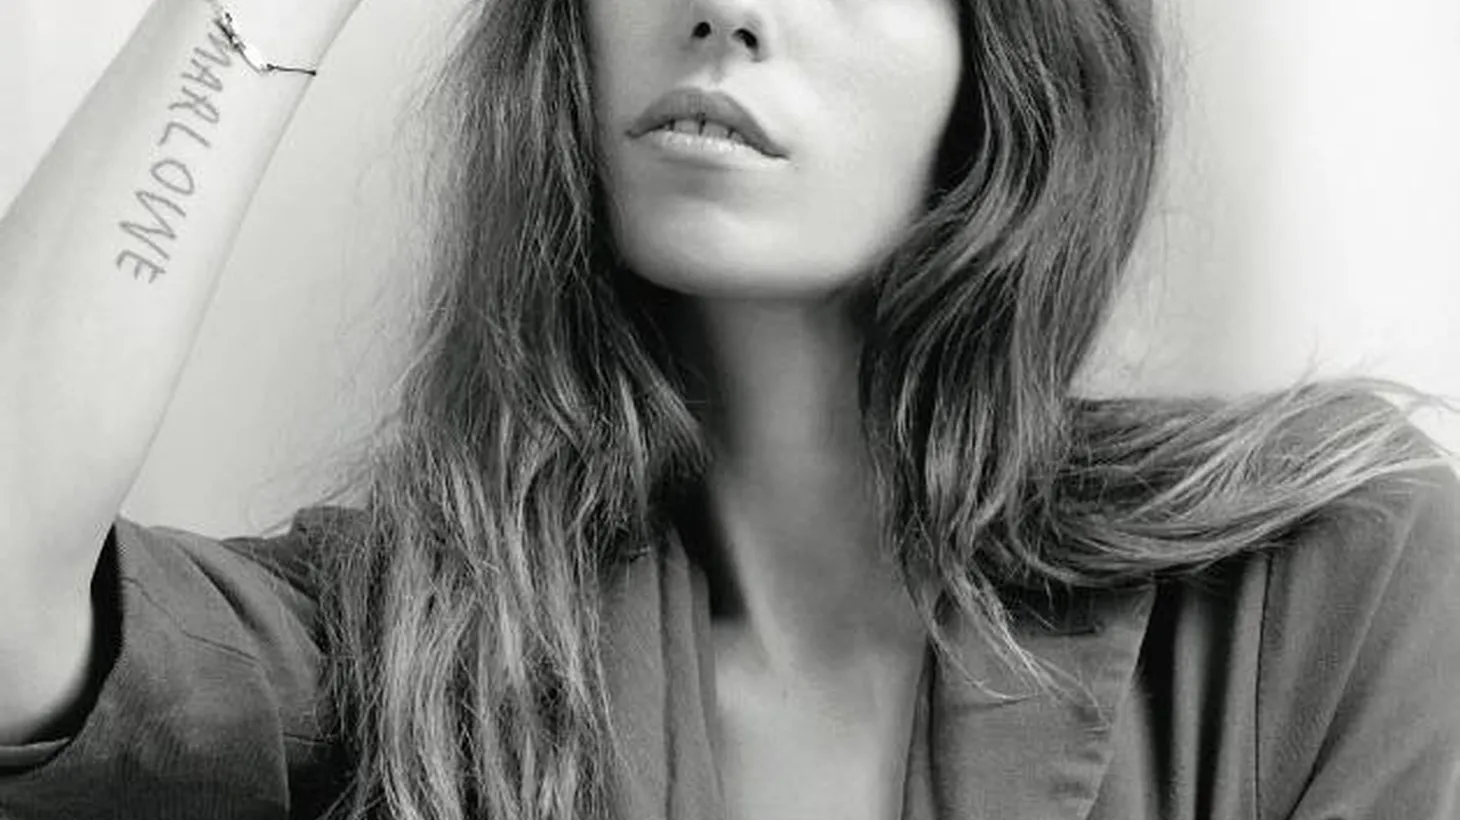 Lou Doillon is a model, singer, and actress who comes from French pop royalty, as the daughter of iconic singer-actress Jane Birkin and half-sister of Charlotte Gainsbourg.